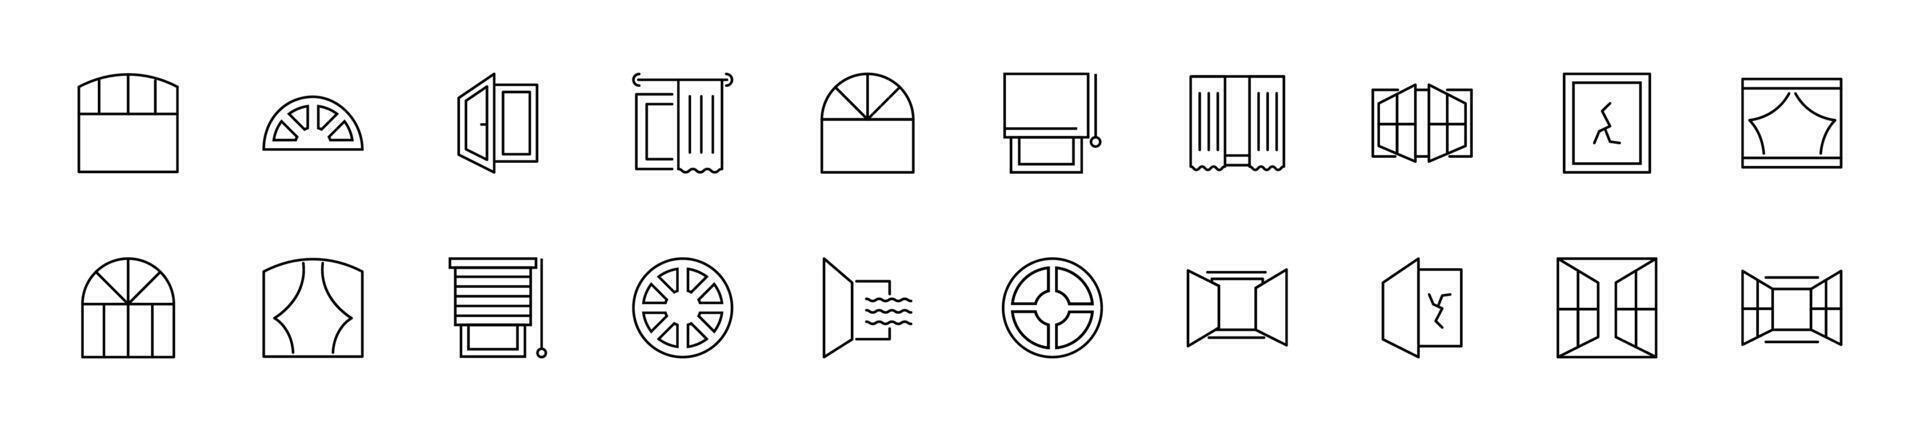 Collection of thin line icons of windows. Linear sign and editable stroke. Suitable for web sites, books, articles vector